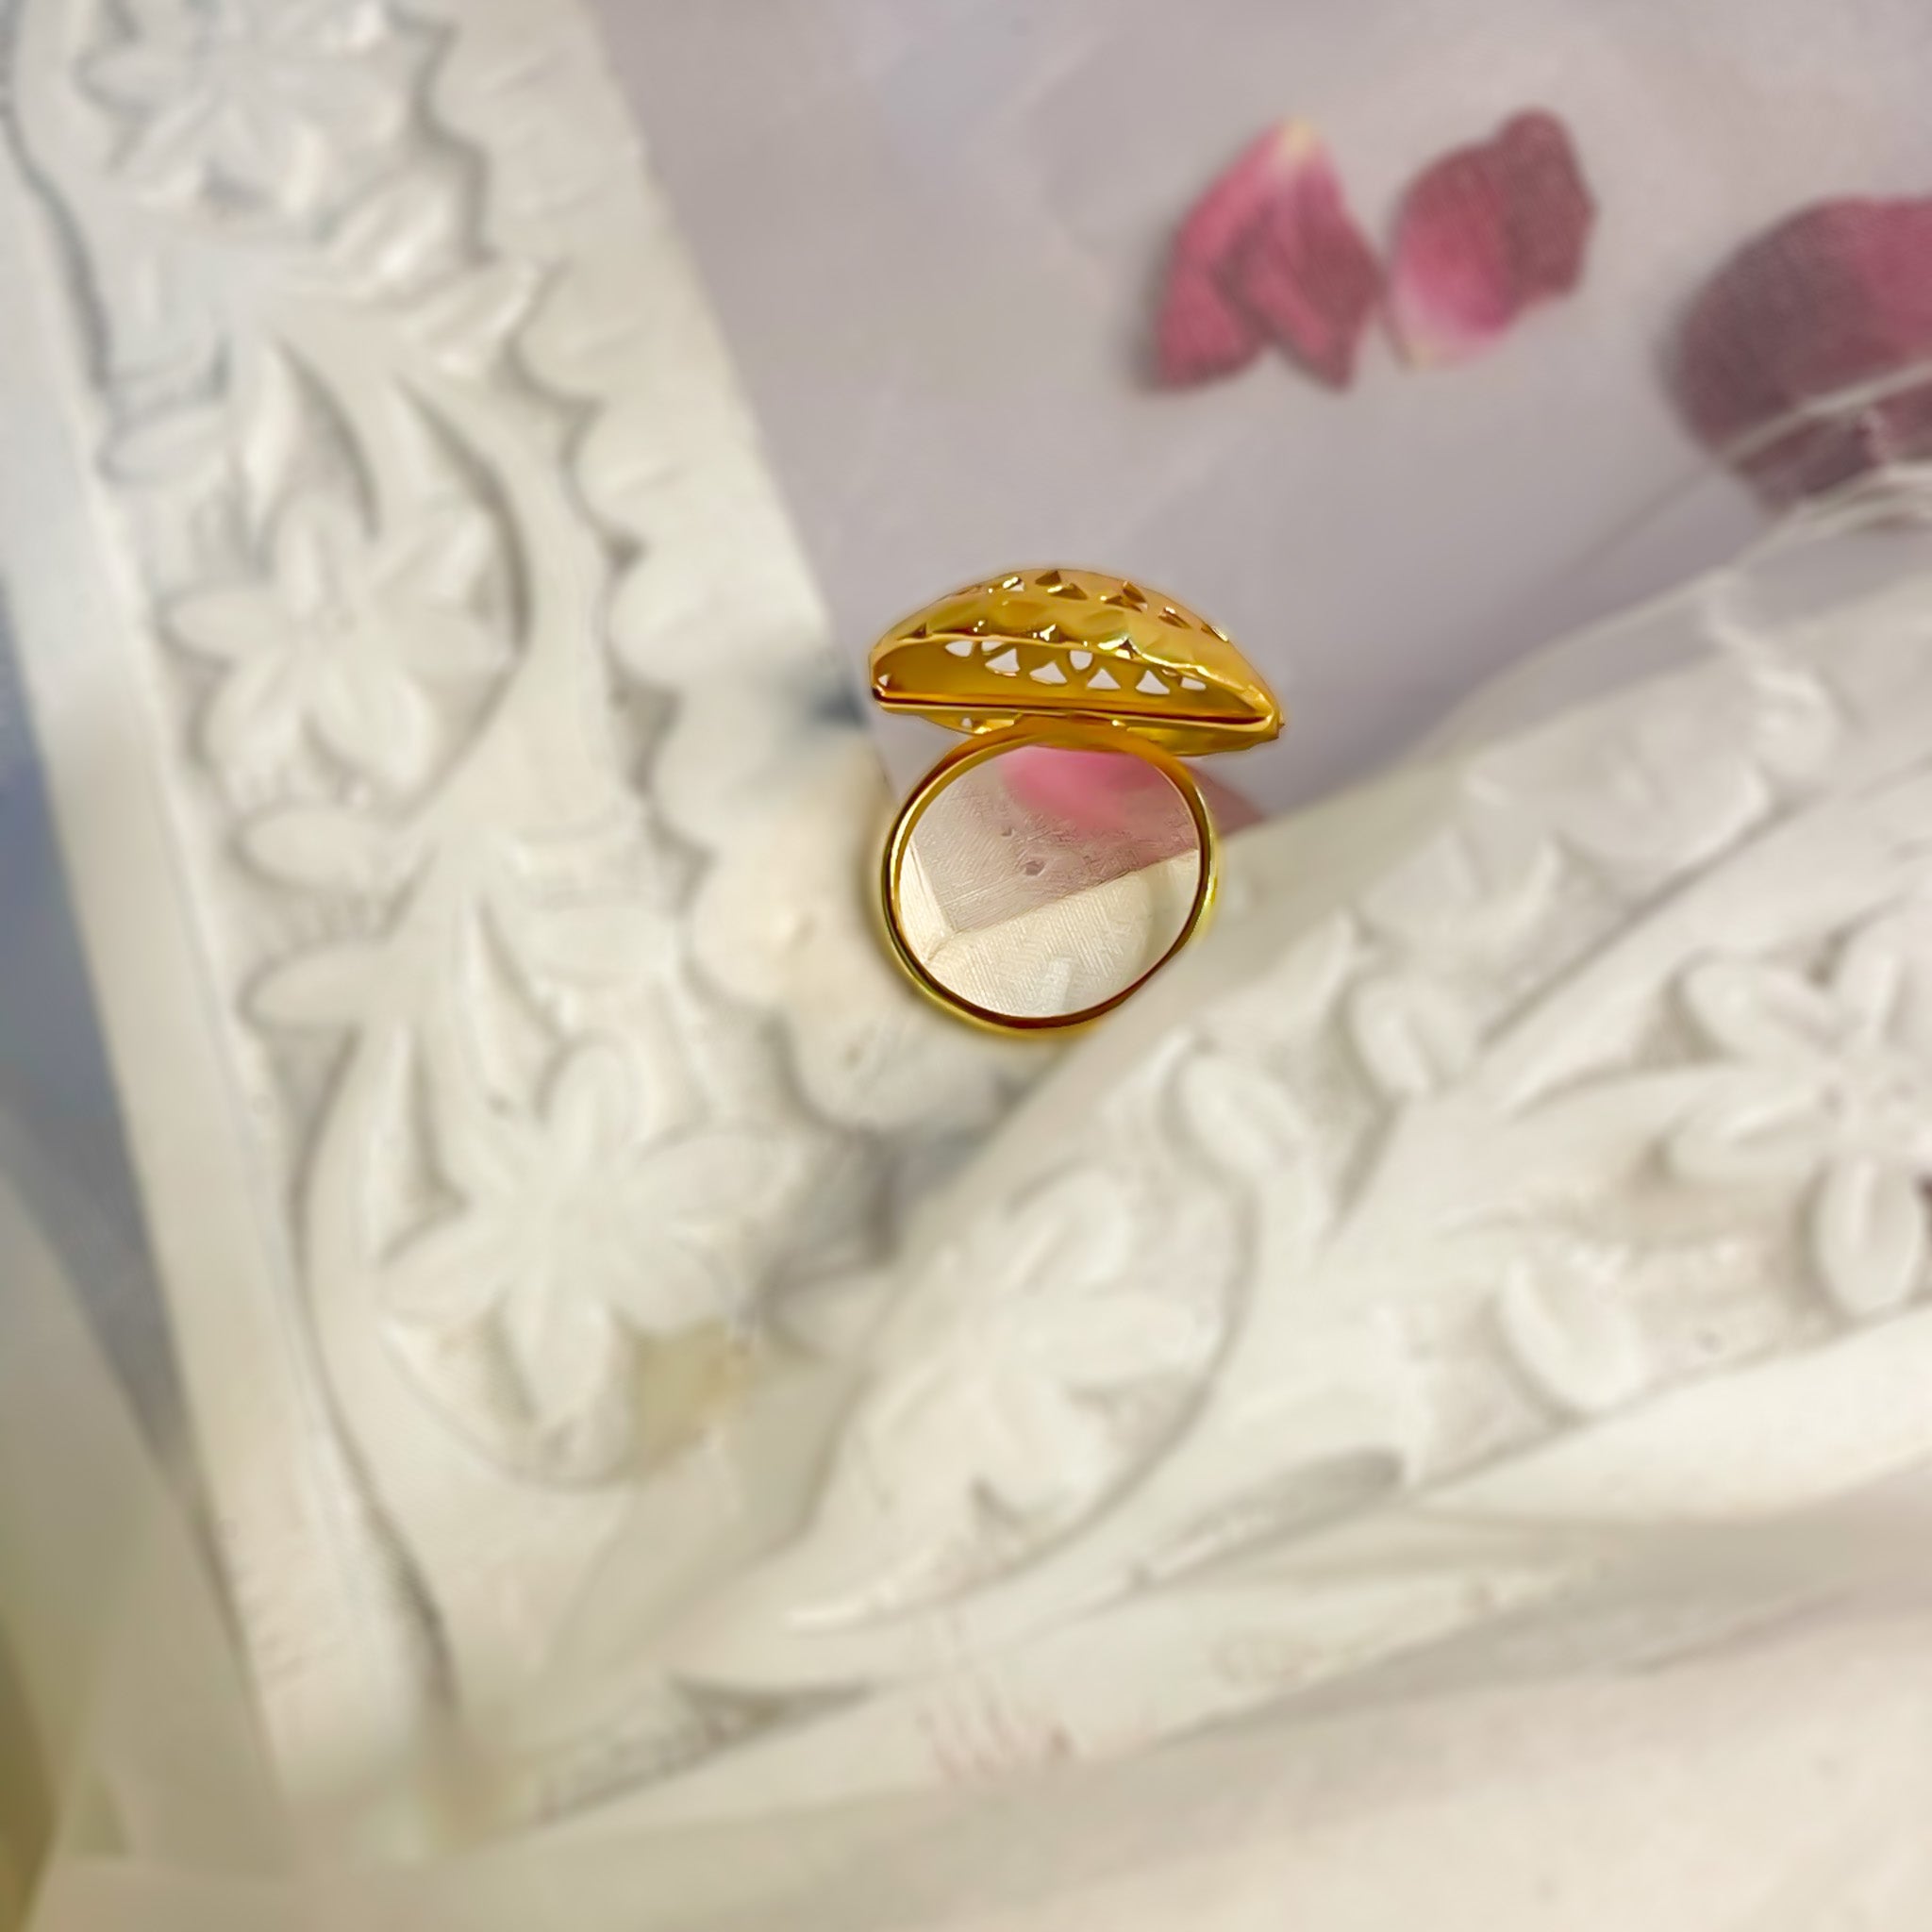 Buy Red coral cabochon ring, Oval cab artisan sterling silver ring online  at aStudio1980.com